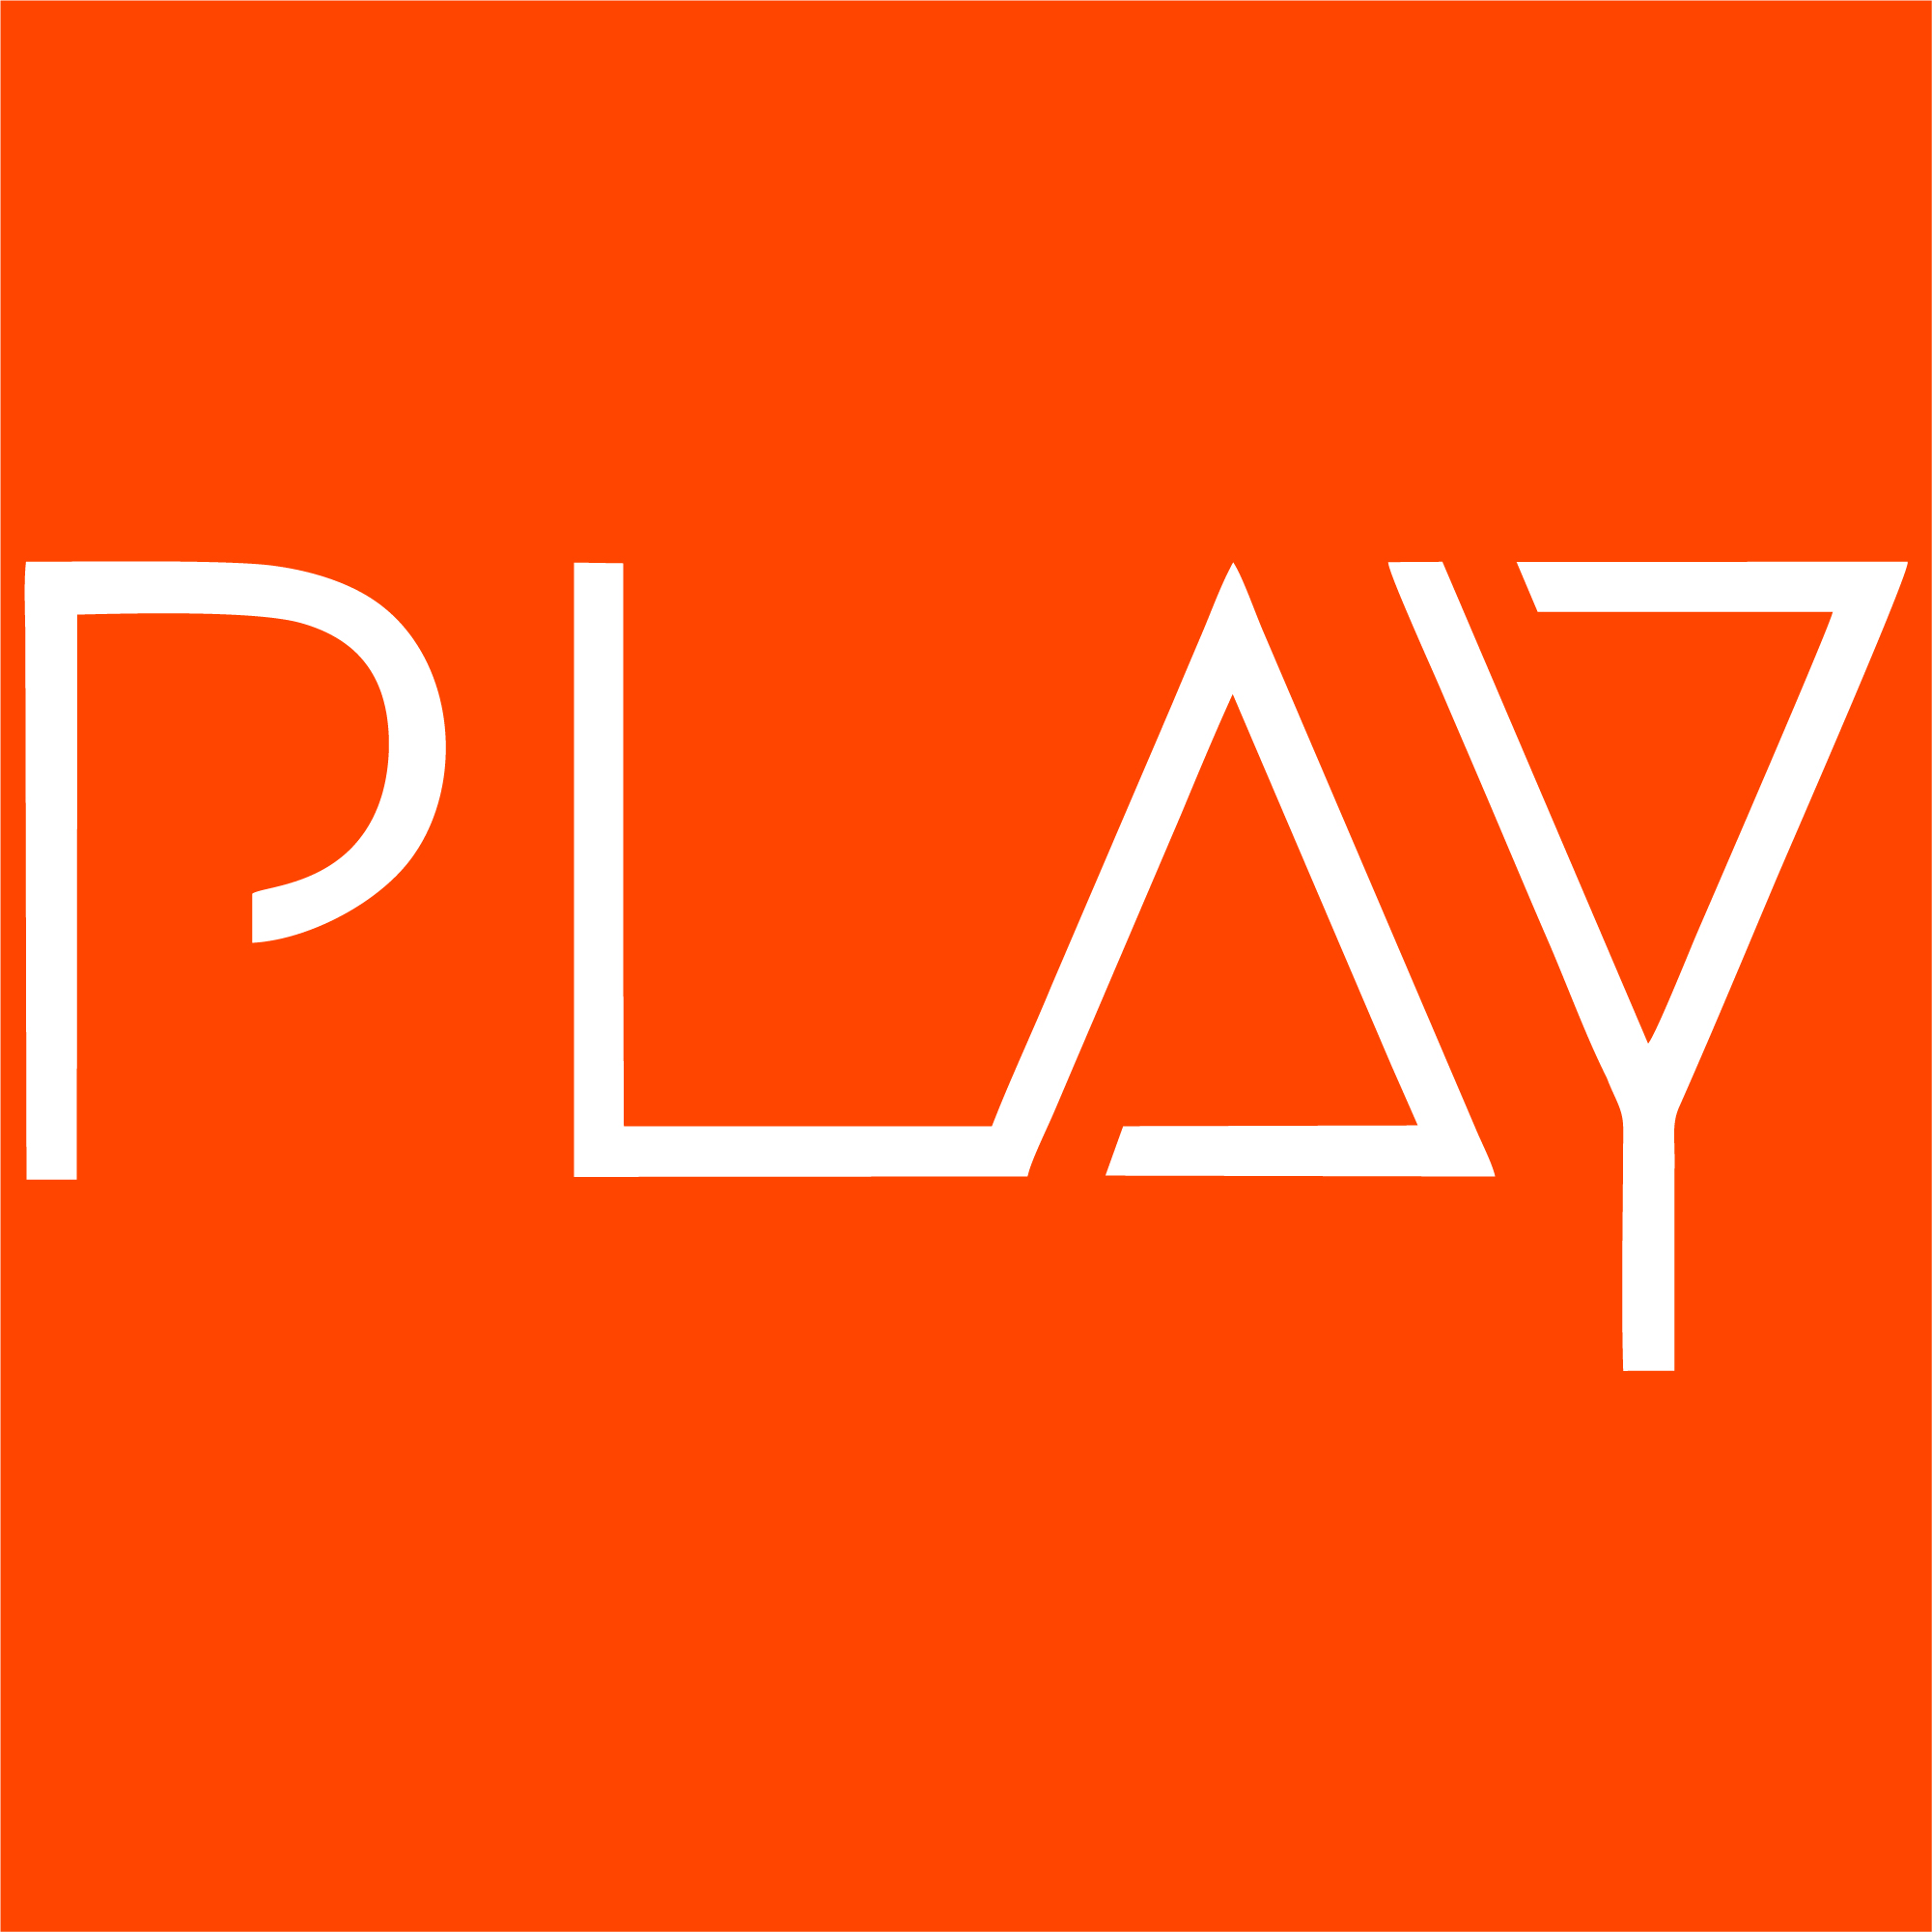 PLAY acquires RiverSong-India